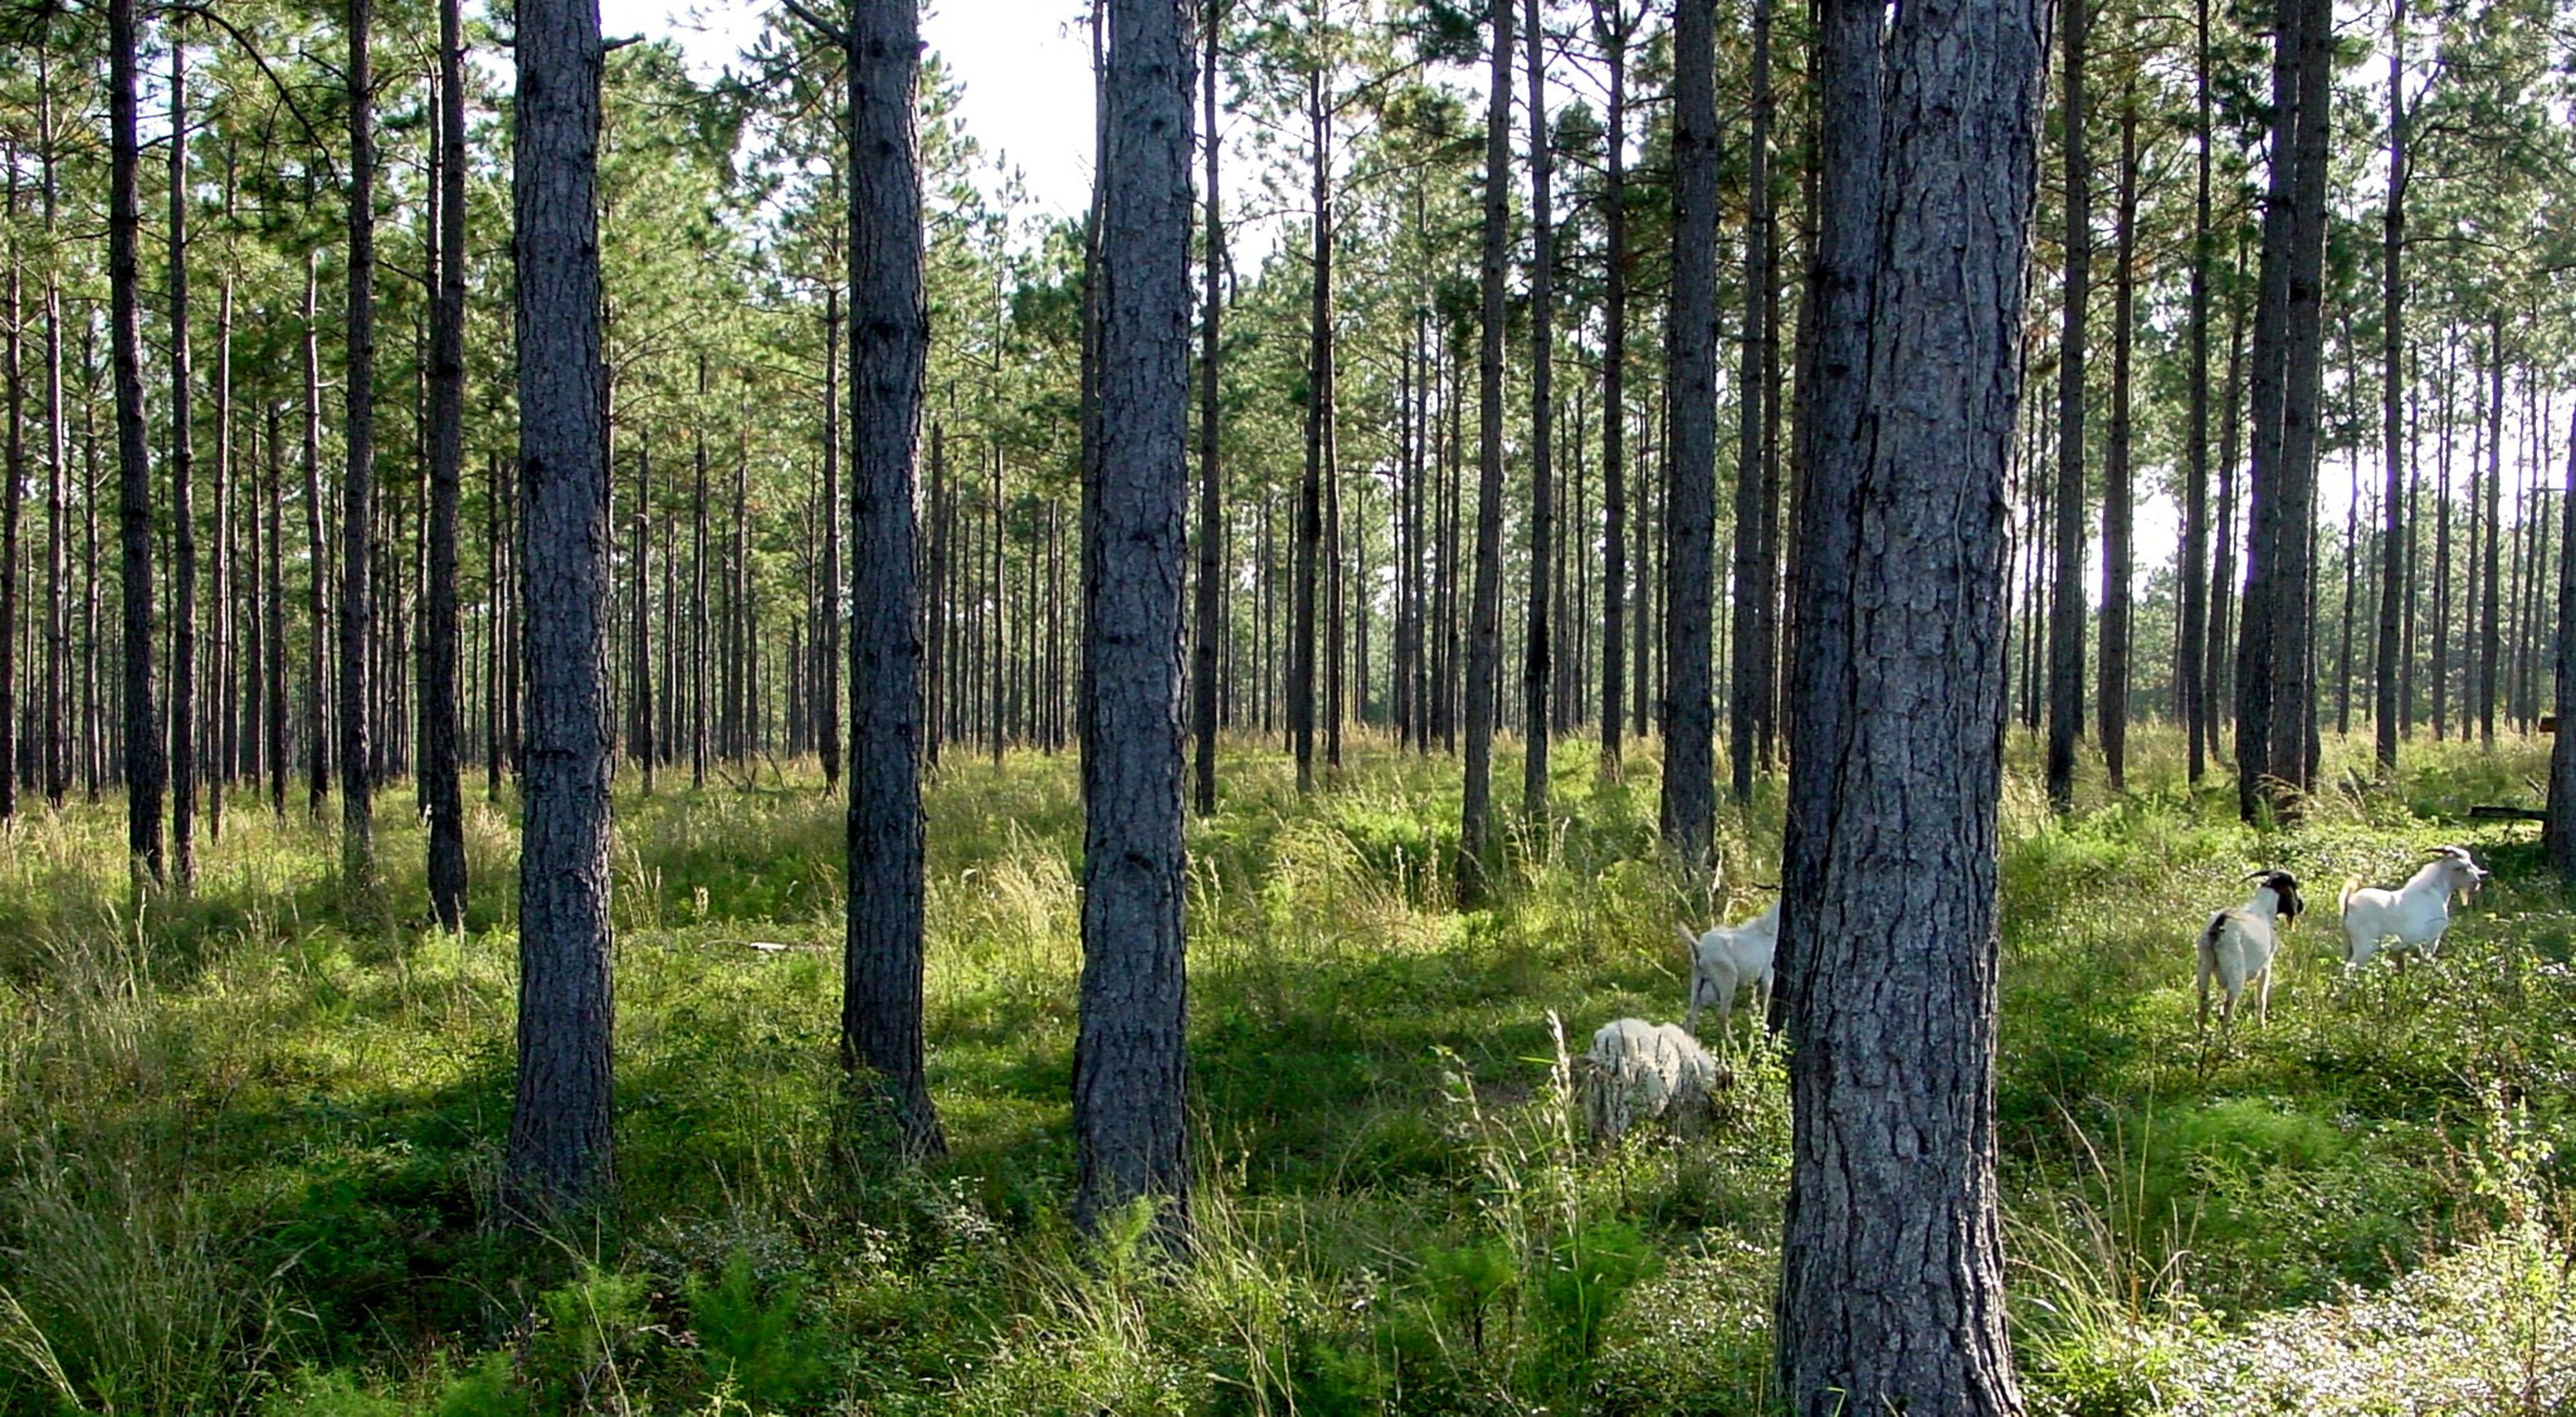 Photo of a longleaf pine forest with several goats browsing among the trees.